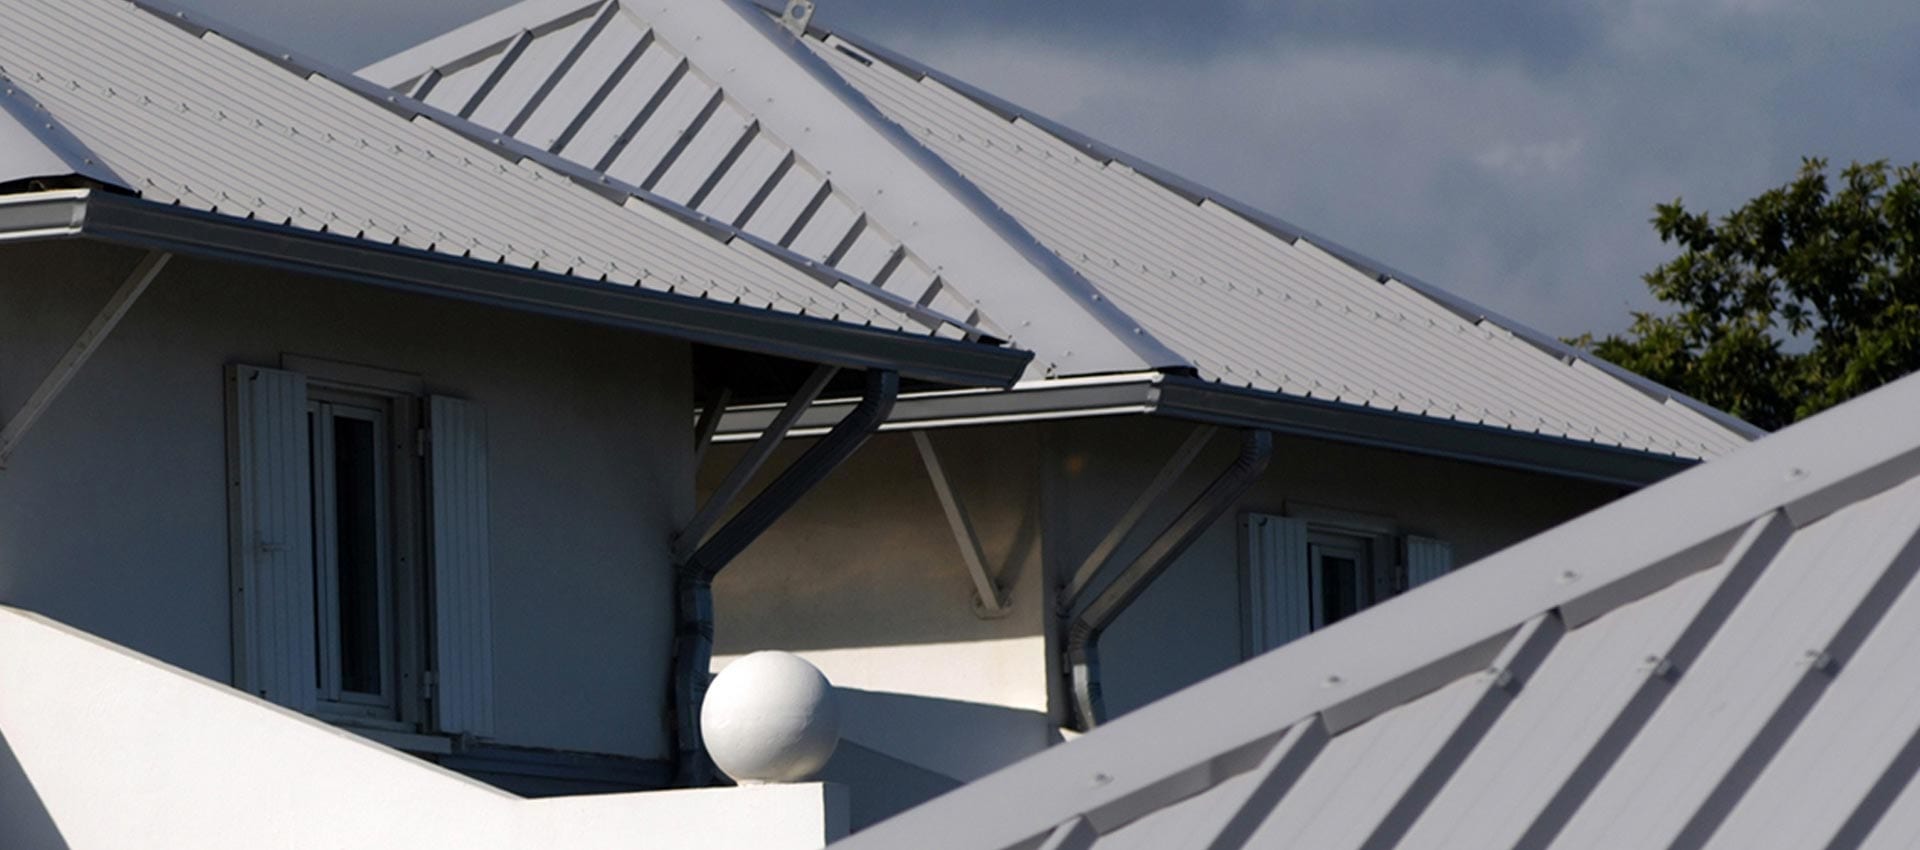 high-quality auckland roofing